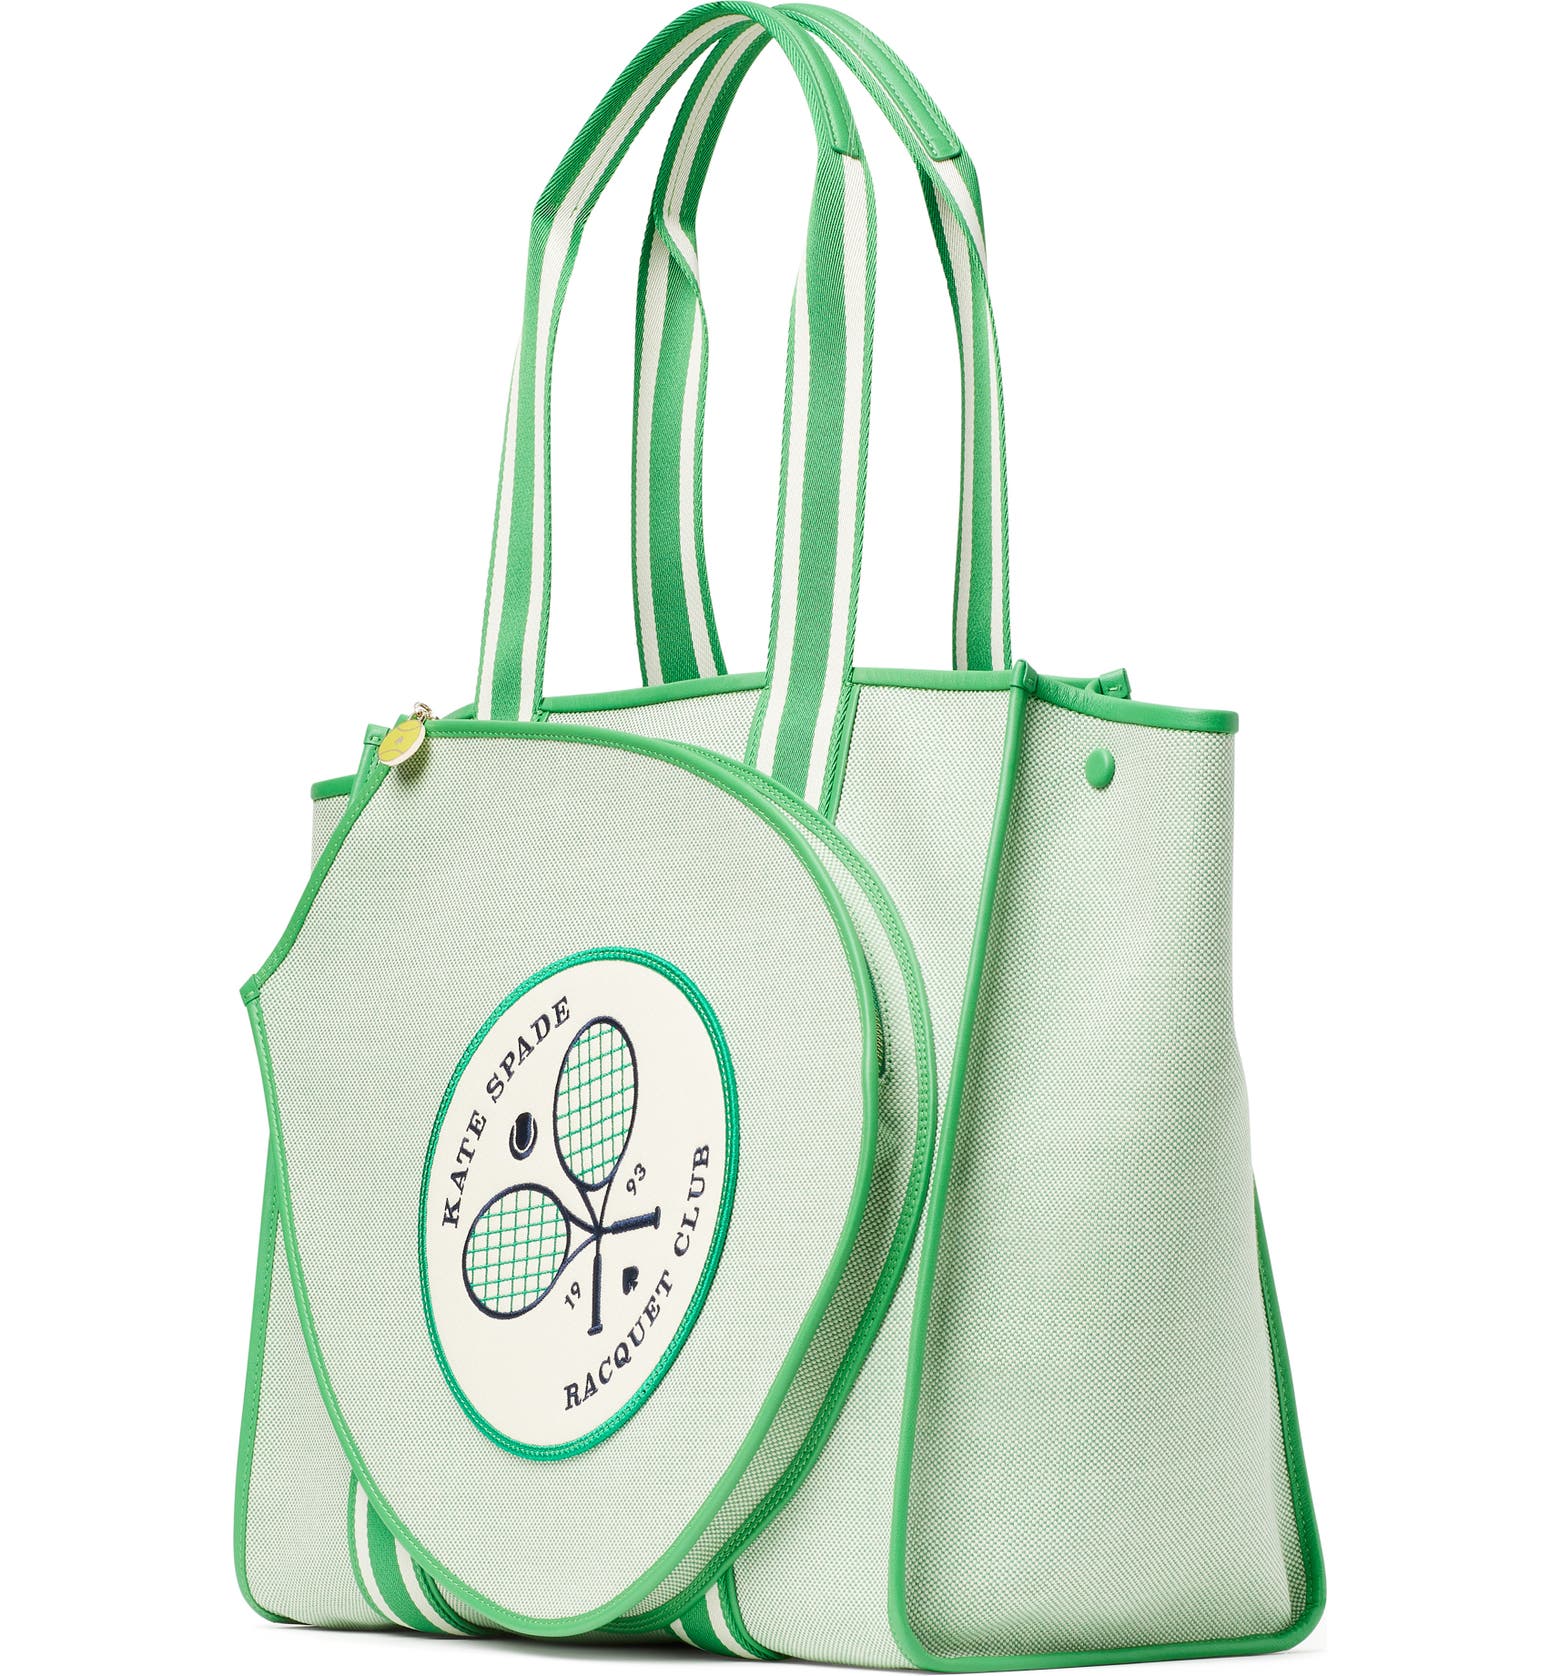 Kate Spade New York + courtside tennis large canvas tote